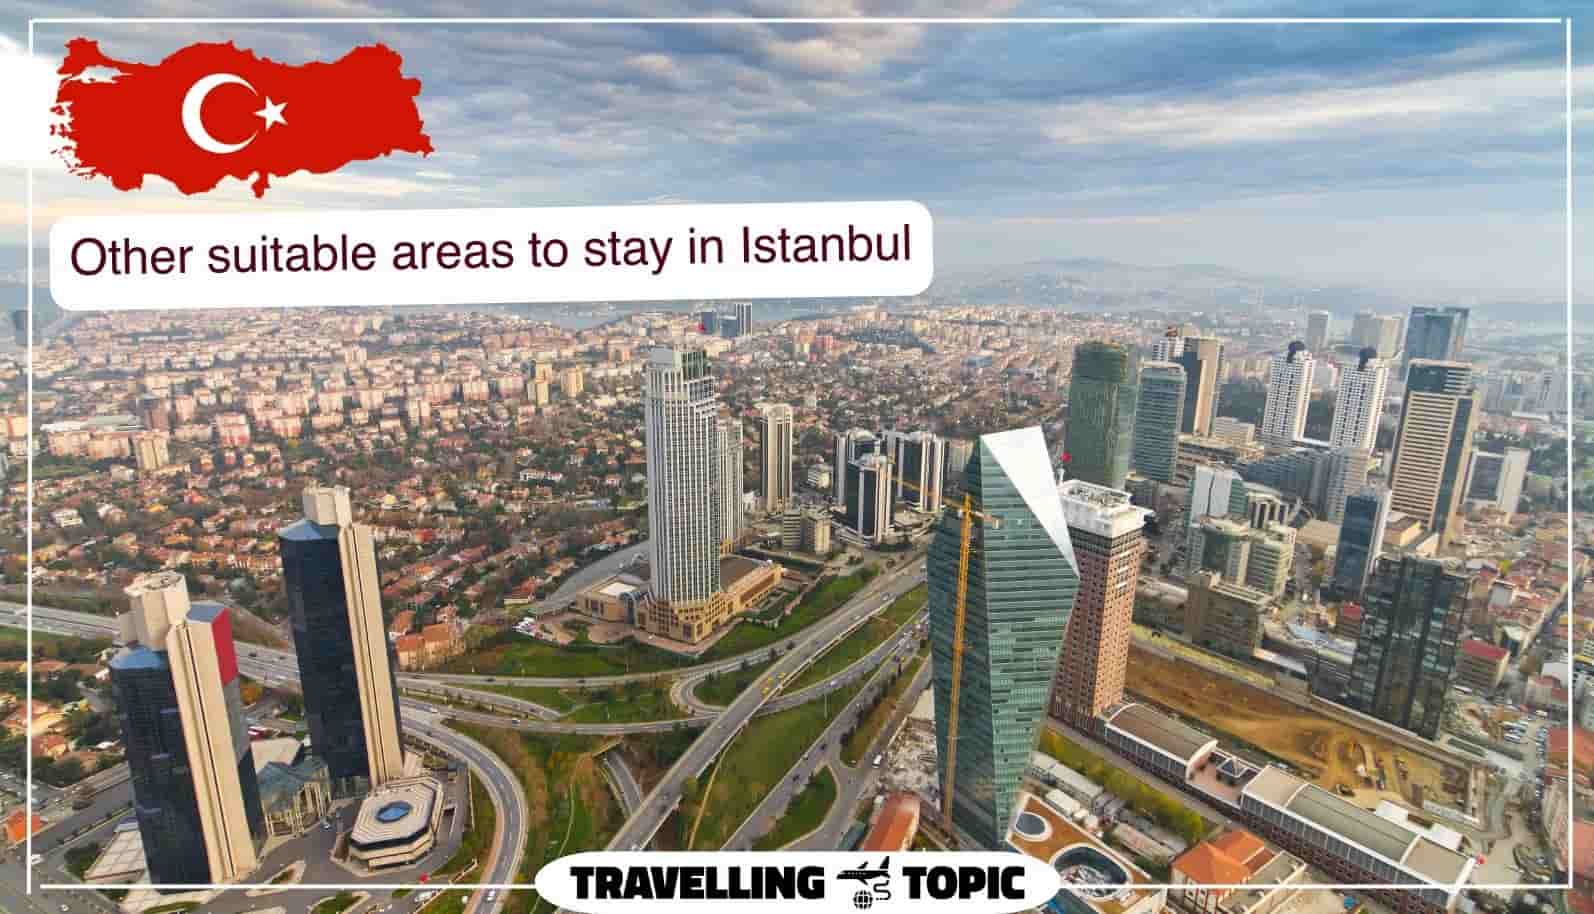 Other suitable areas to stay in Istanbul